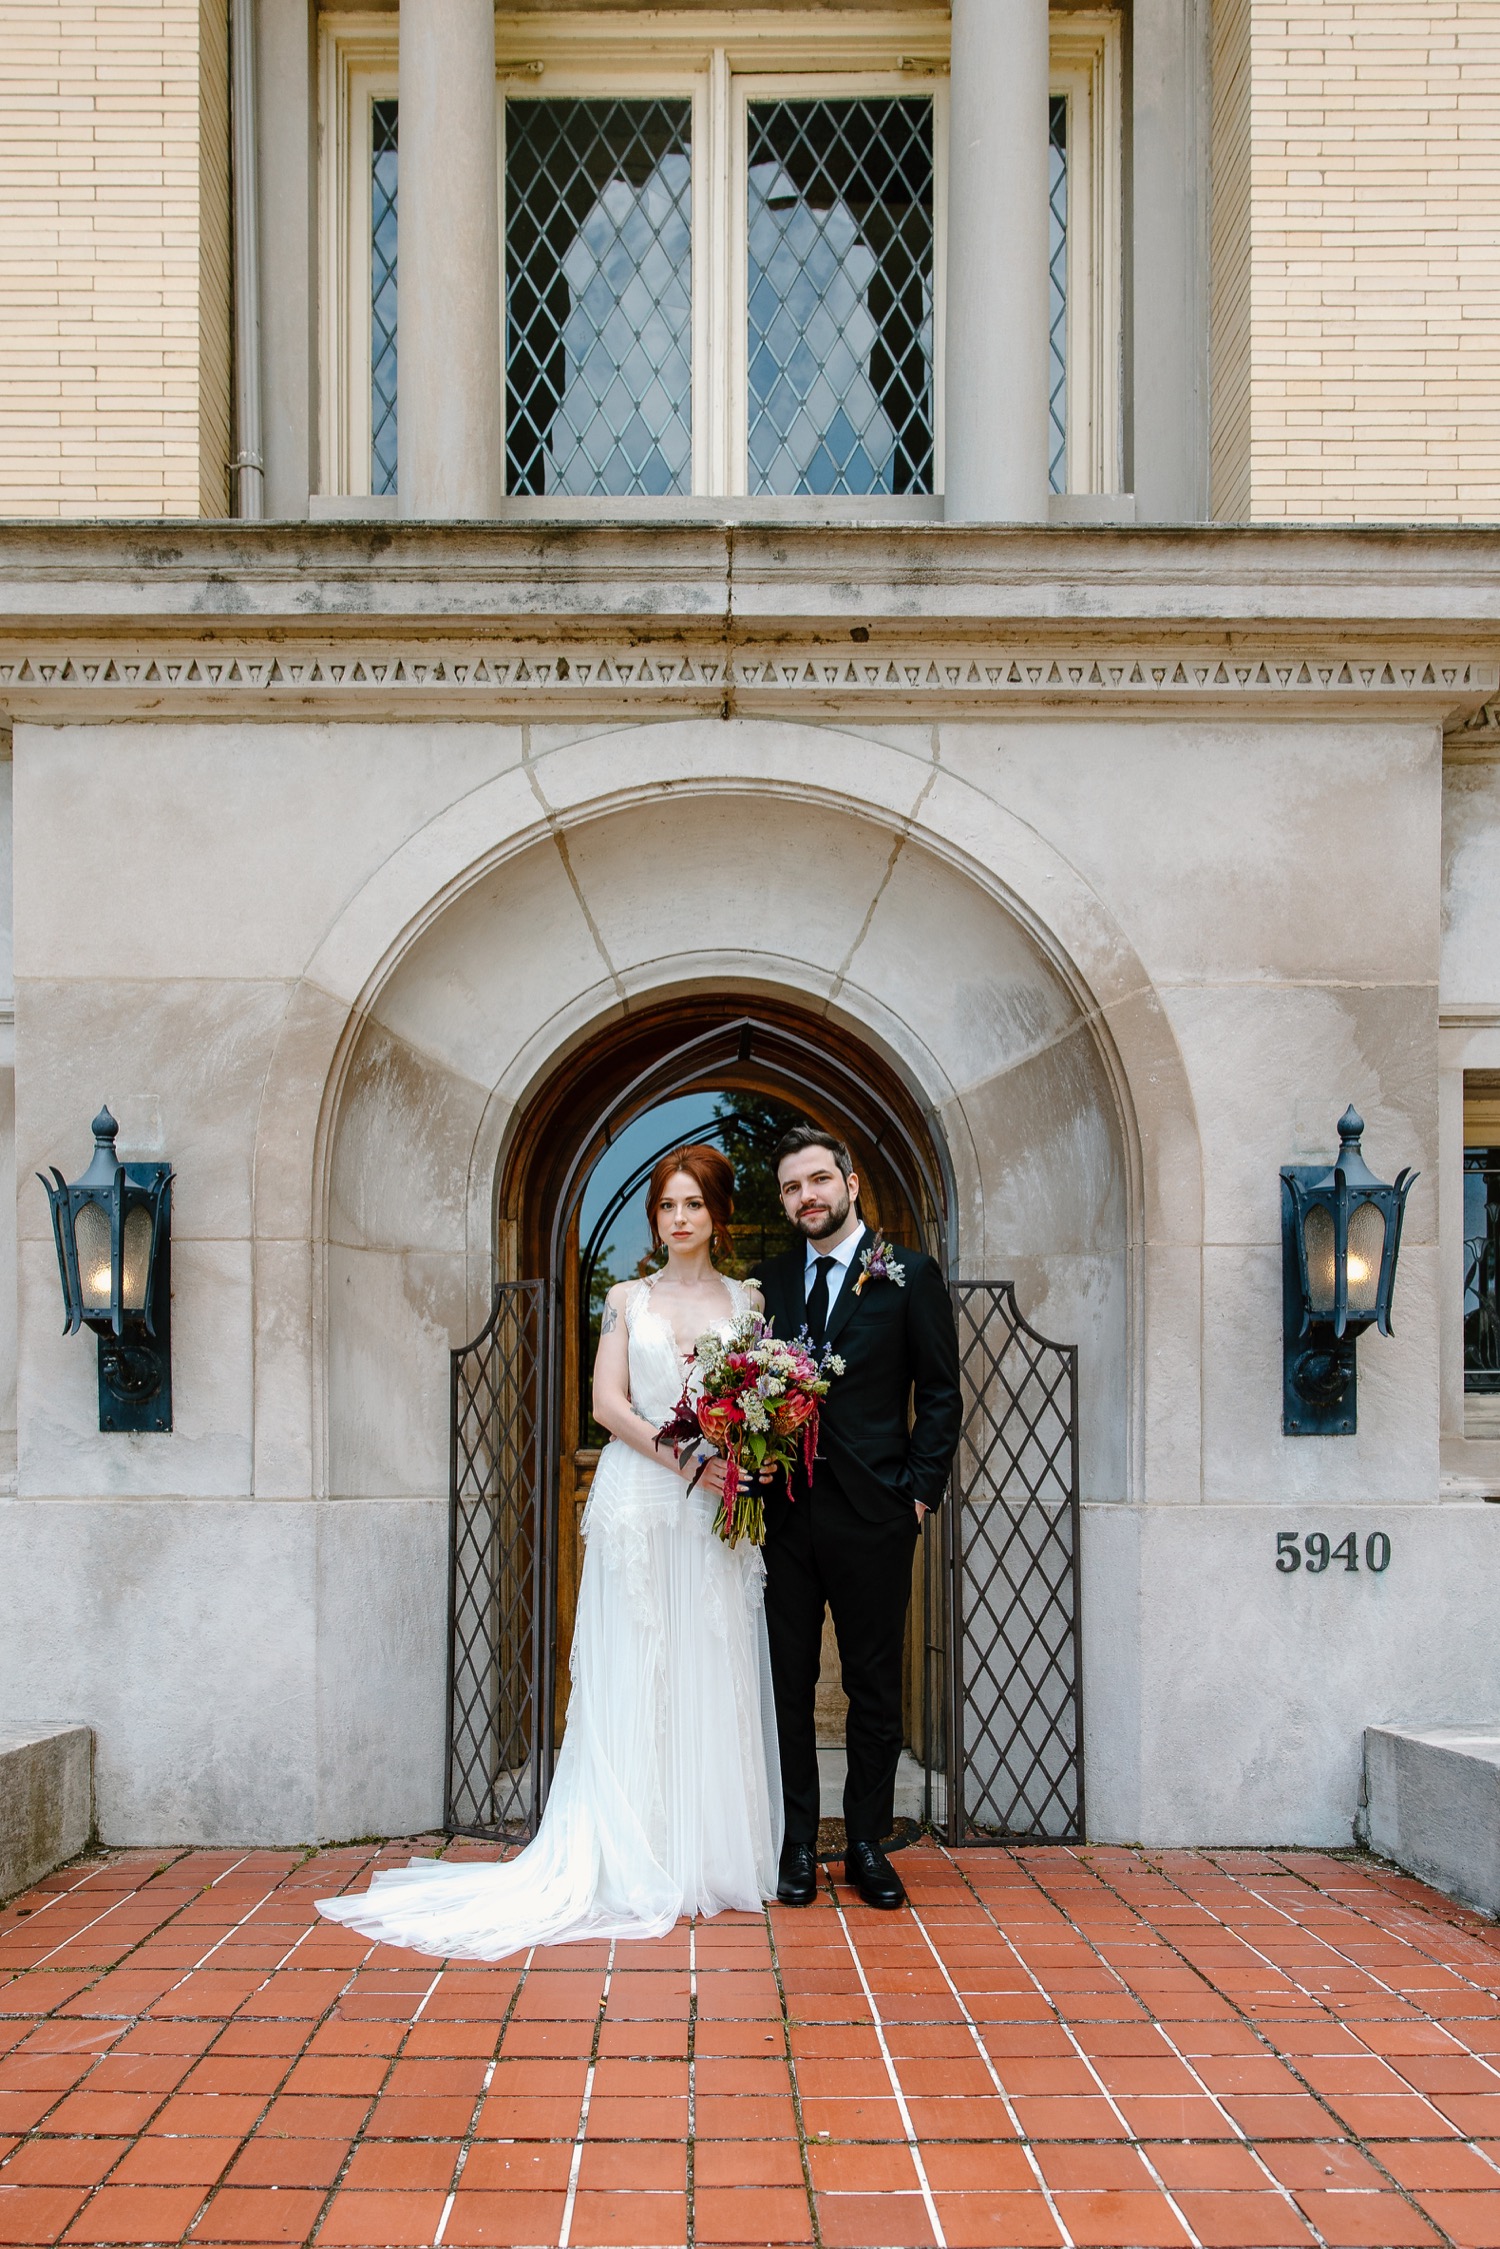 Edgy Chicago Wedding at Colvin House